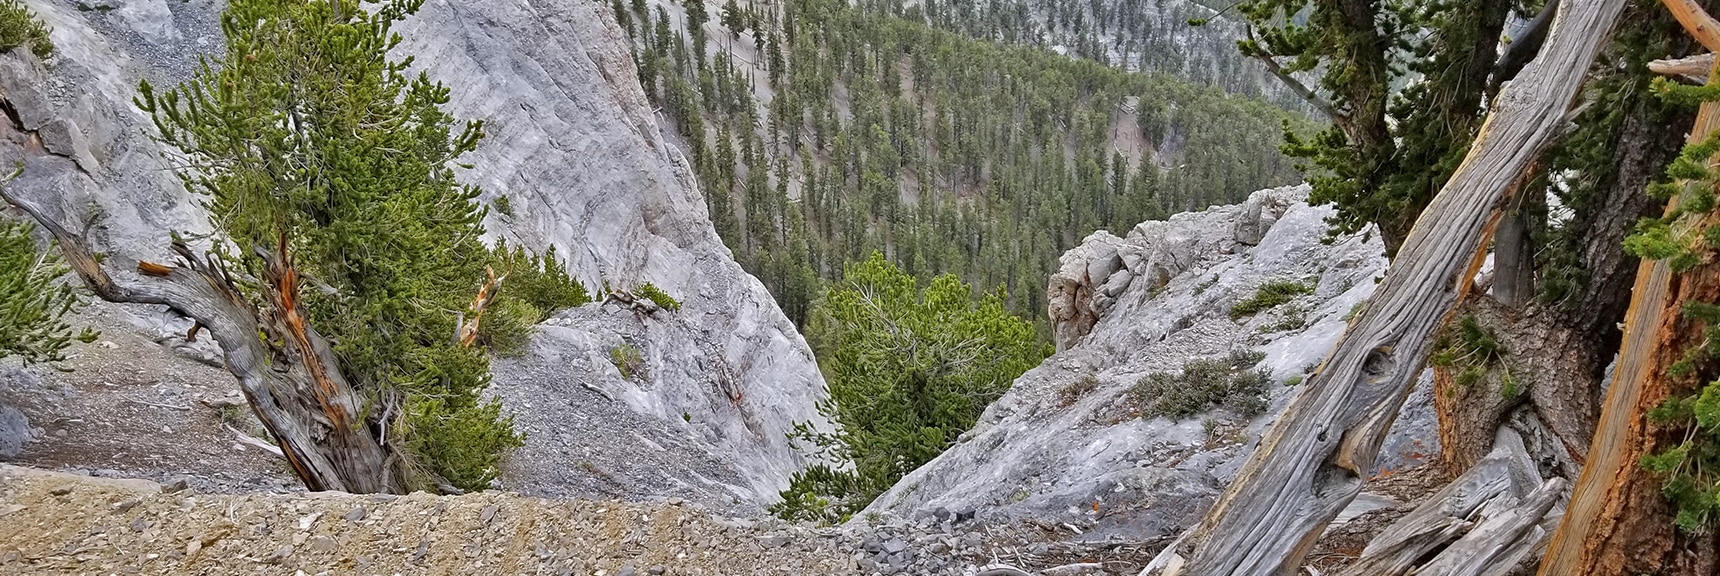 You've Seen the Cliffs Above the Ledge. Here are the Cliffs Below! | Mummy Mountain NW Cliffs | Mt Charleston Wilderness | Spring Mountains, Nevada